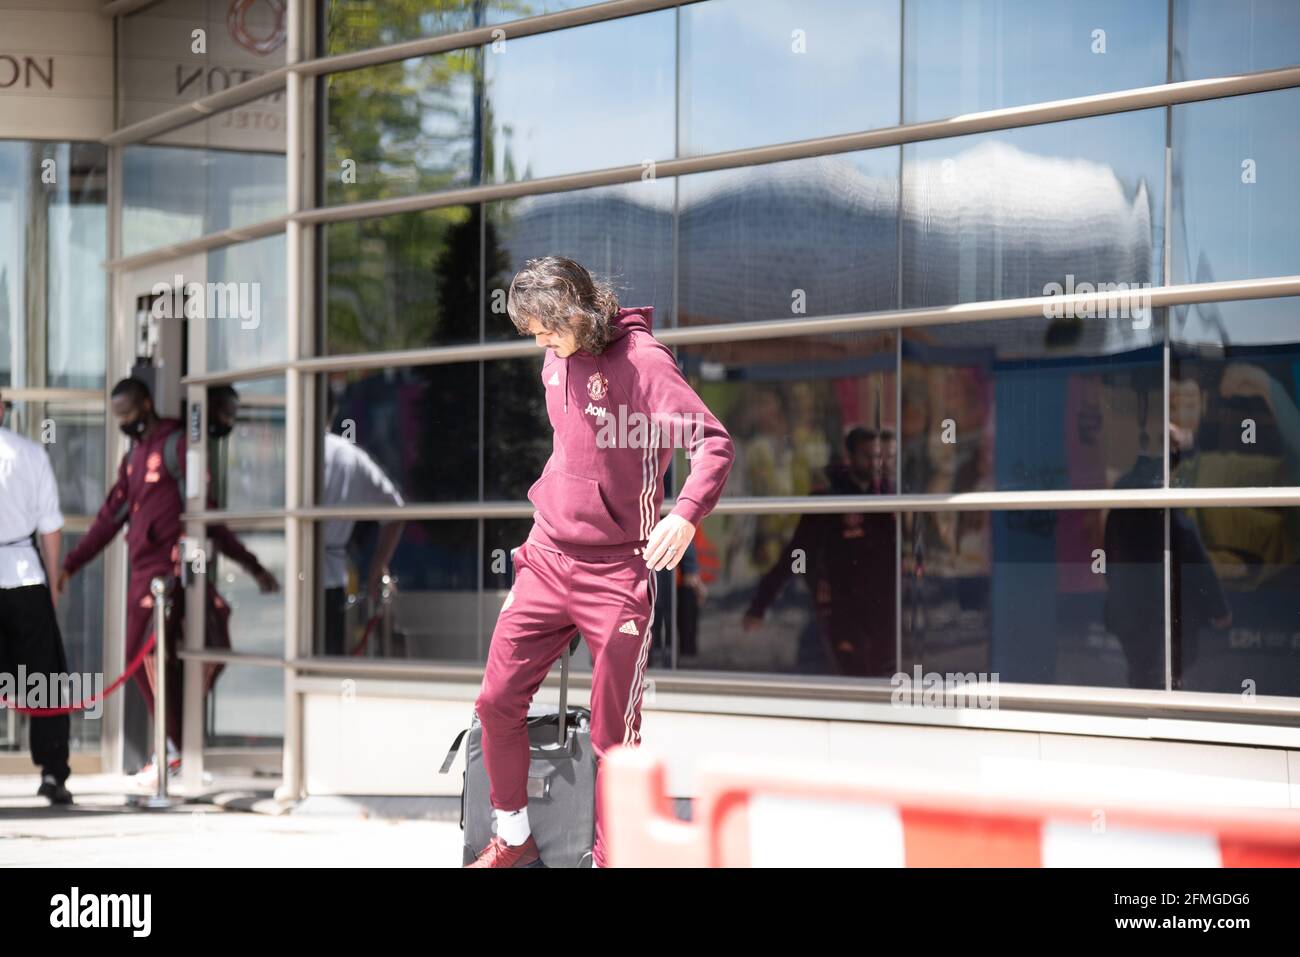 Birmingham, UK. 9th May, 2021. Edinson Cavani struggles with his suitcase as he leaves Clayton Hotel in Birmingham City Centre around midday 9th May before a match against Aston Villa. Credit: Ryan Underwood/Alamy Live News Stock Photo